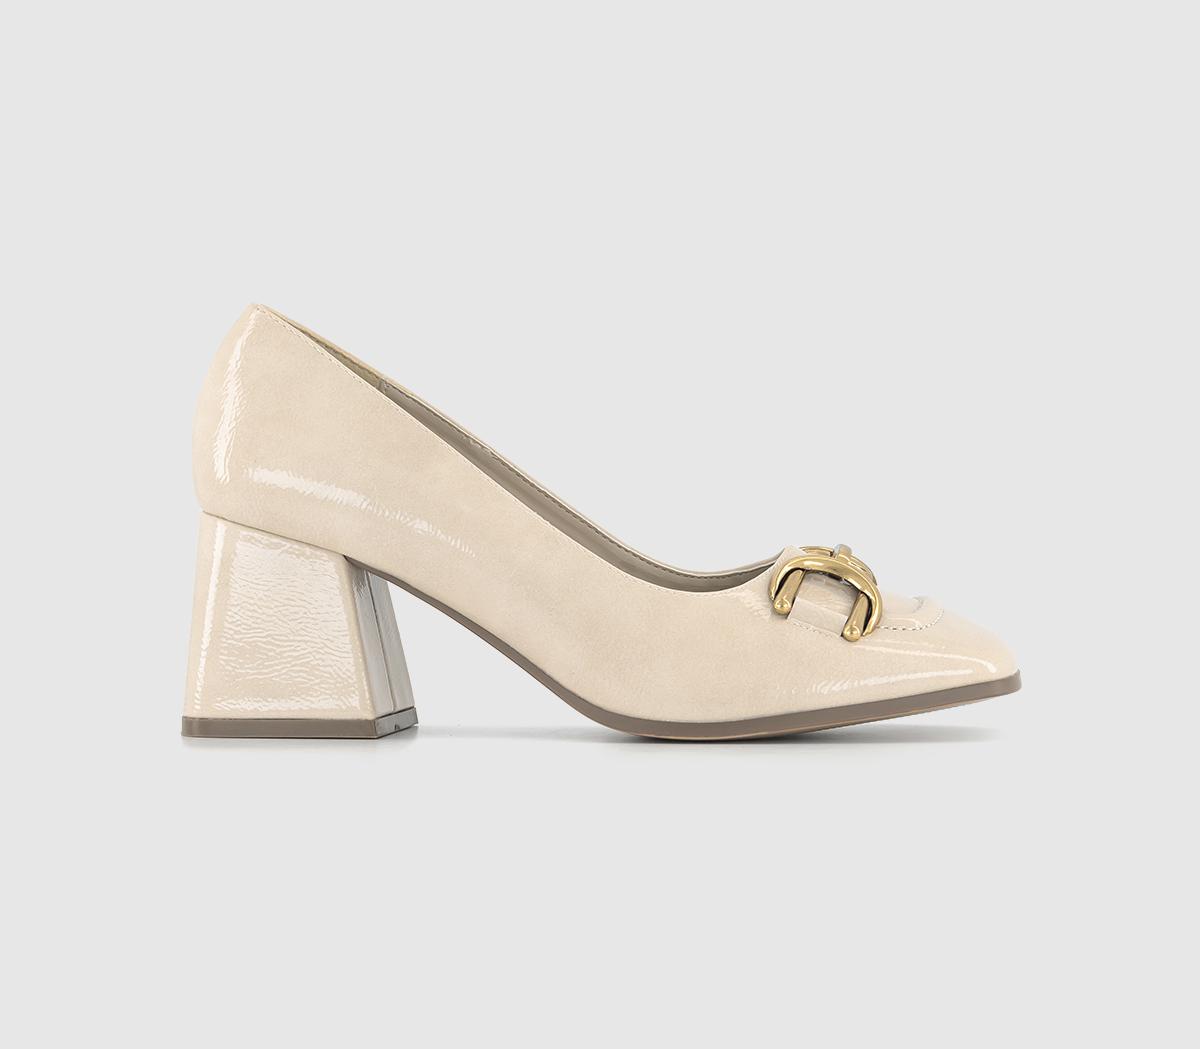 OFFICEMercer Square Toe Trim Court HeelsOff White